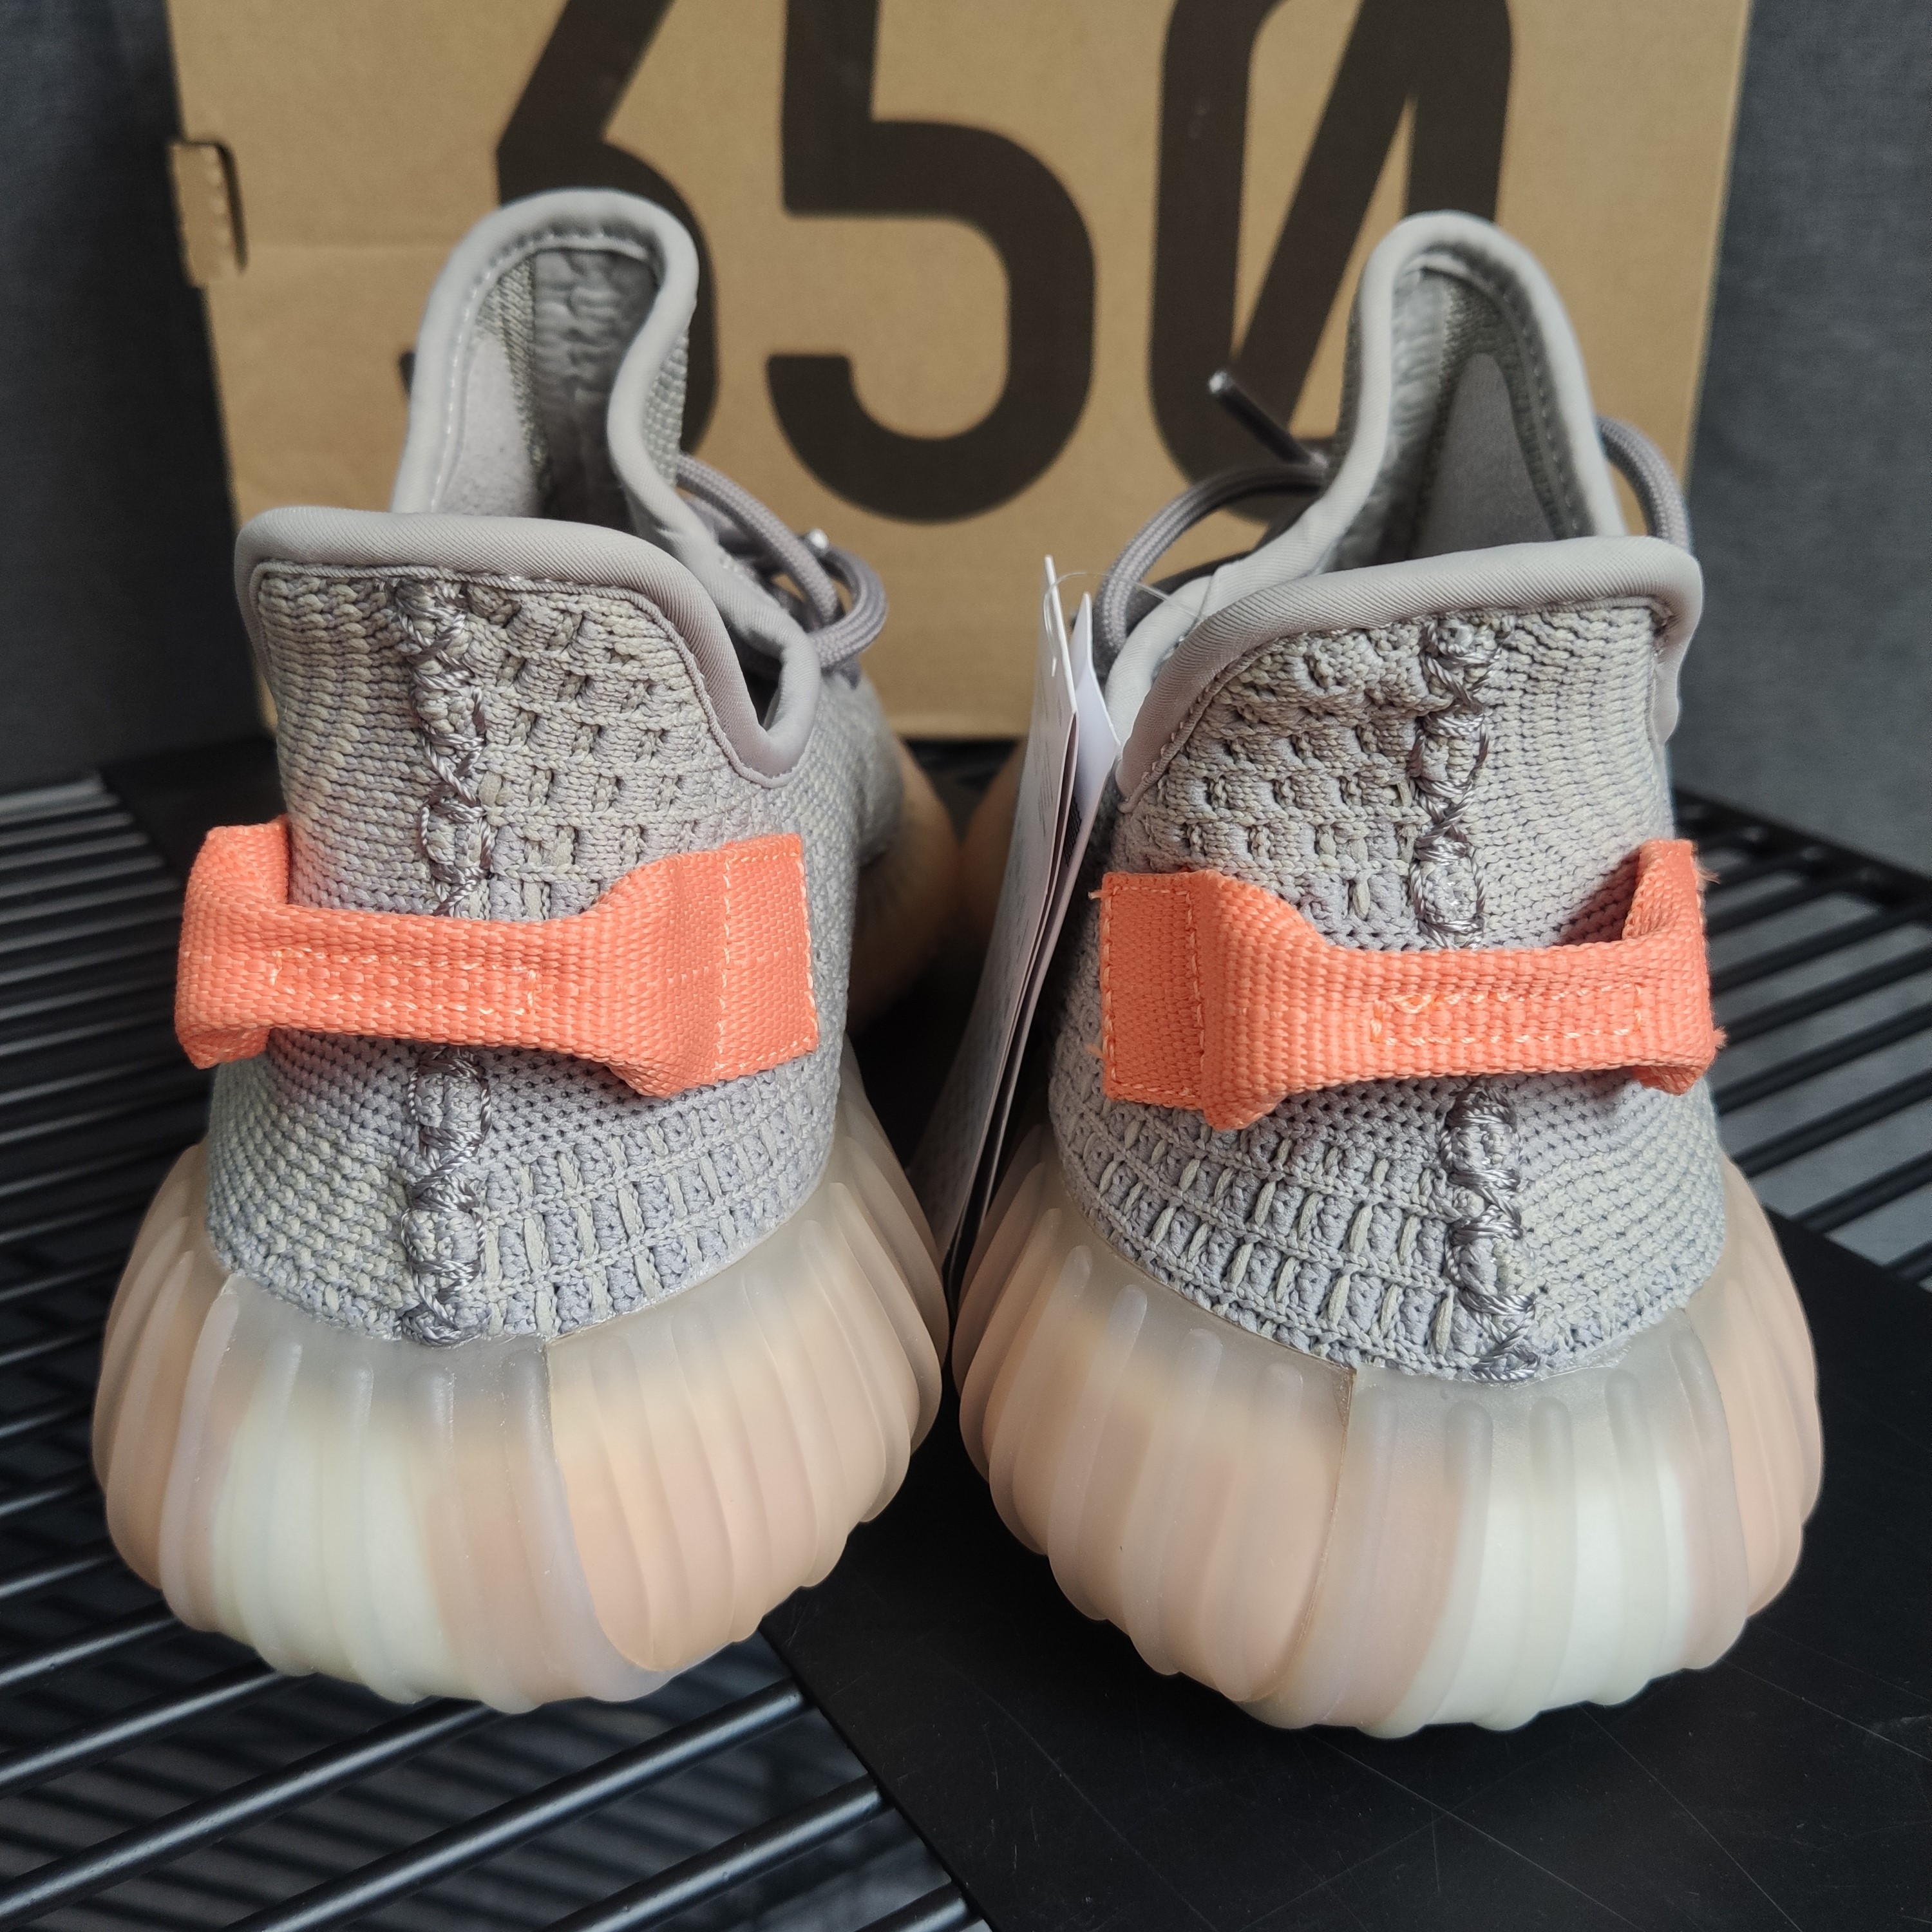 Adidas Yeezy Boost 350 V2 kanye West Trfrm Perfect Quality Sneakers MS09216 Updated in 2019.05.25